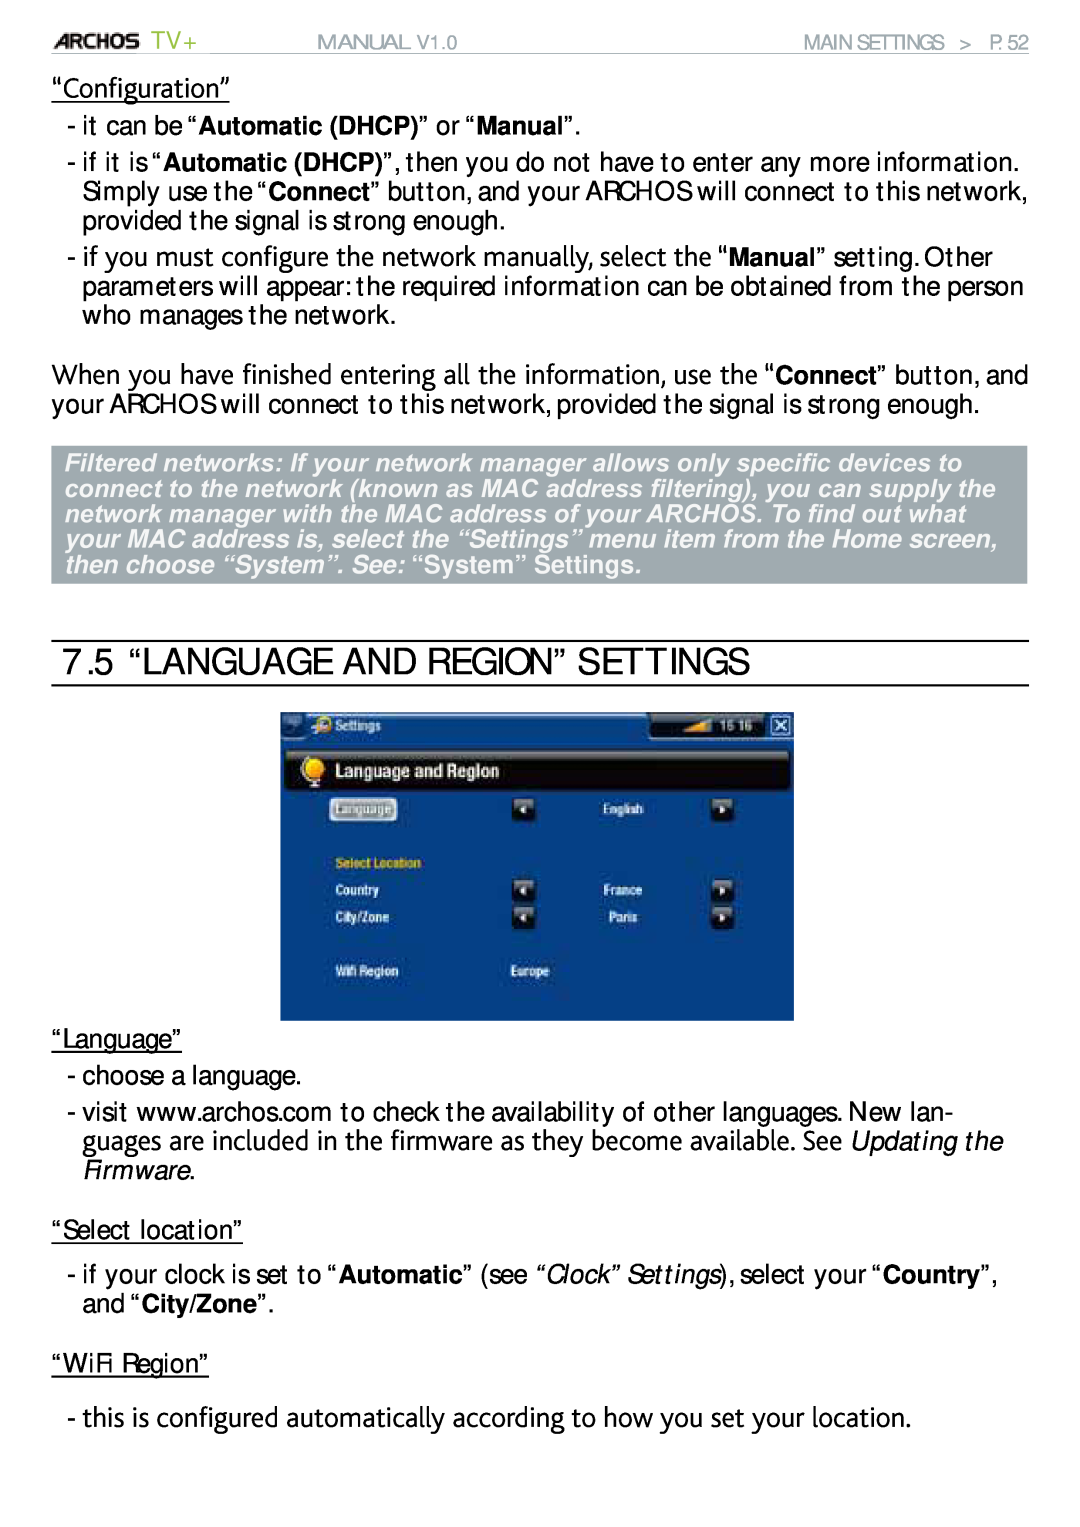 Archos 500973 user manual 7.5 “LANGUAGE AND REGION” SETTINGS, it can be “Automatic DHCP” or “Manual”, Main Settings P 